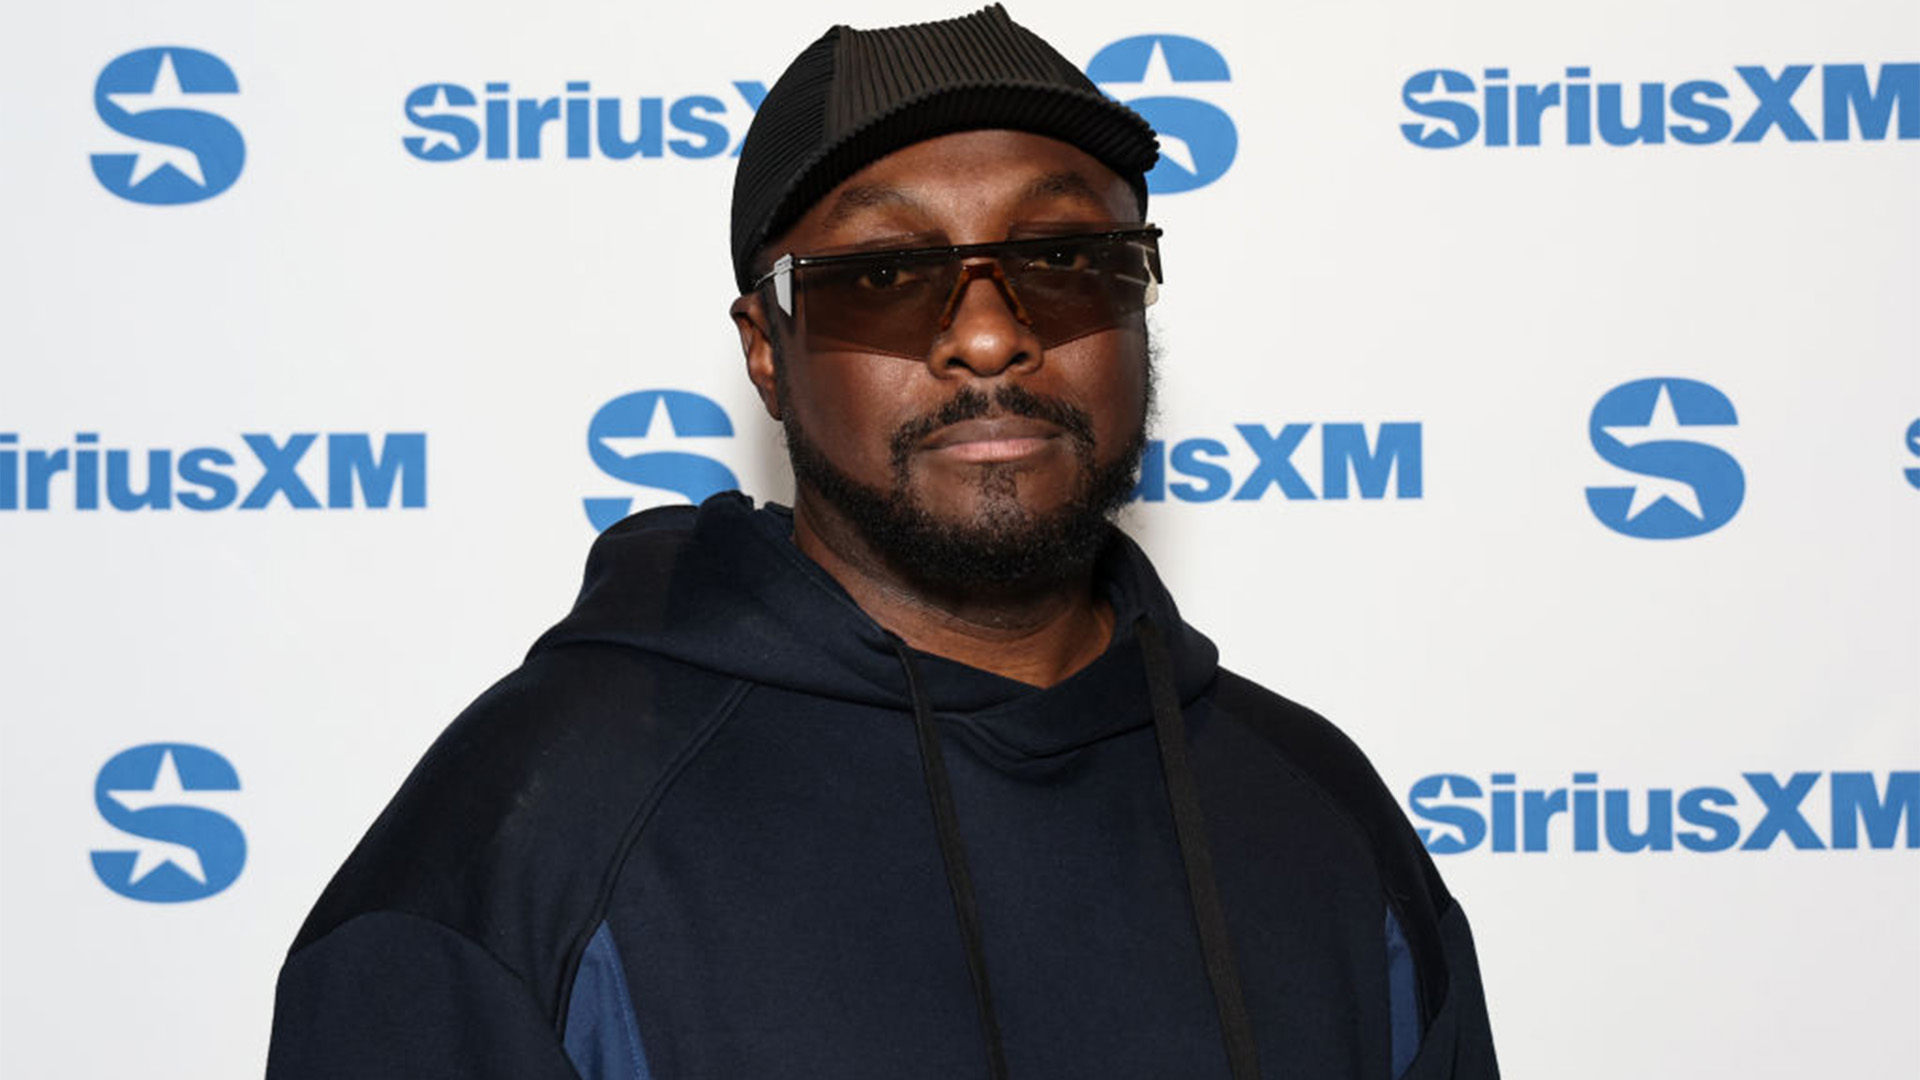 Will.i.am Set To Launch A SiriusXM Show Focused On AI Innovation To Educate The Public About The Technology